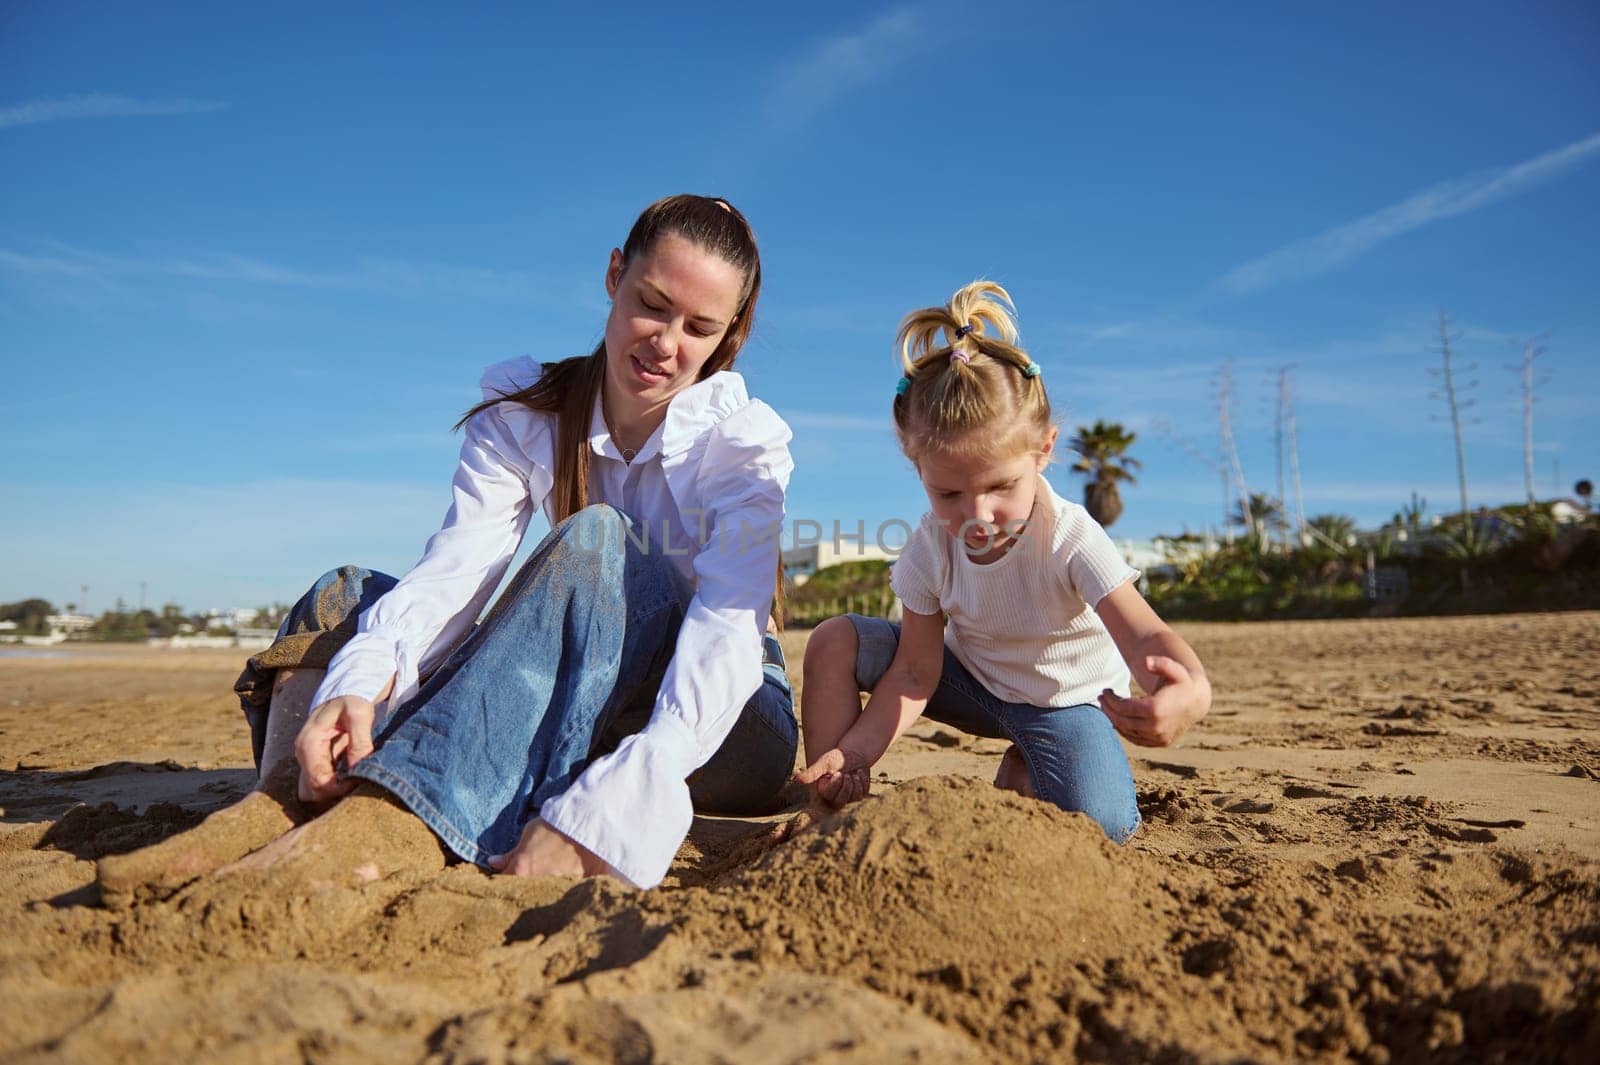 Happy mother and daughter playing together on the beach, building sandy castle